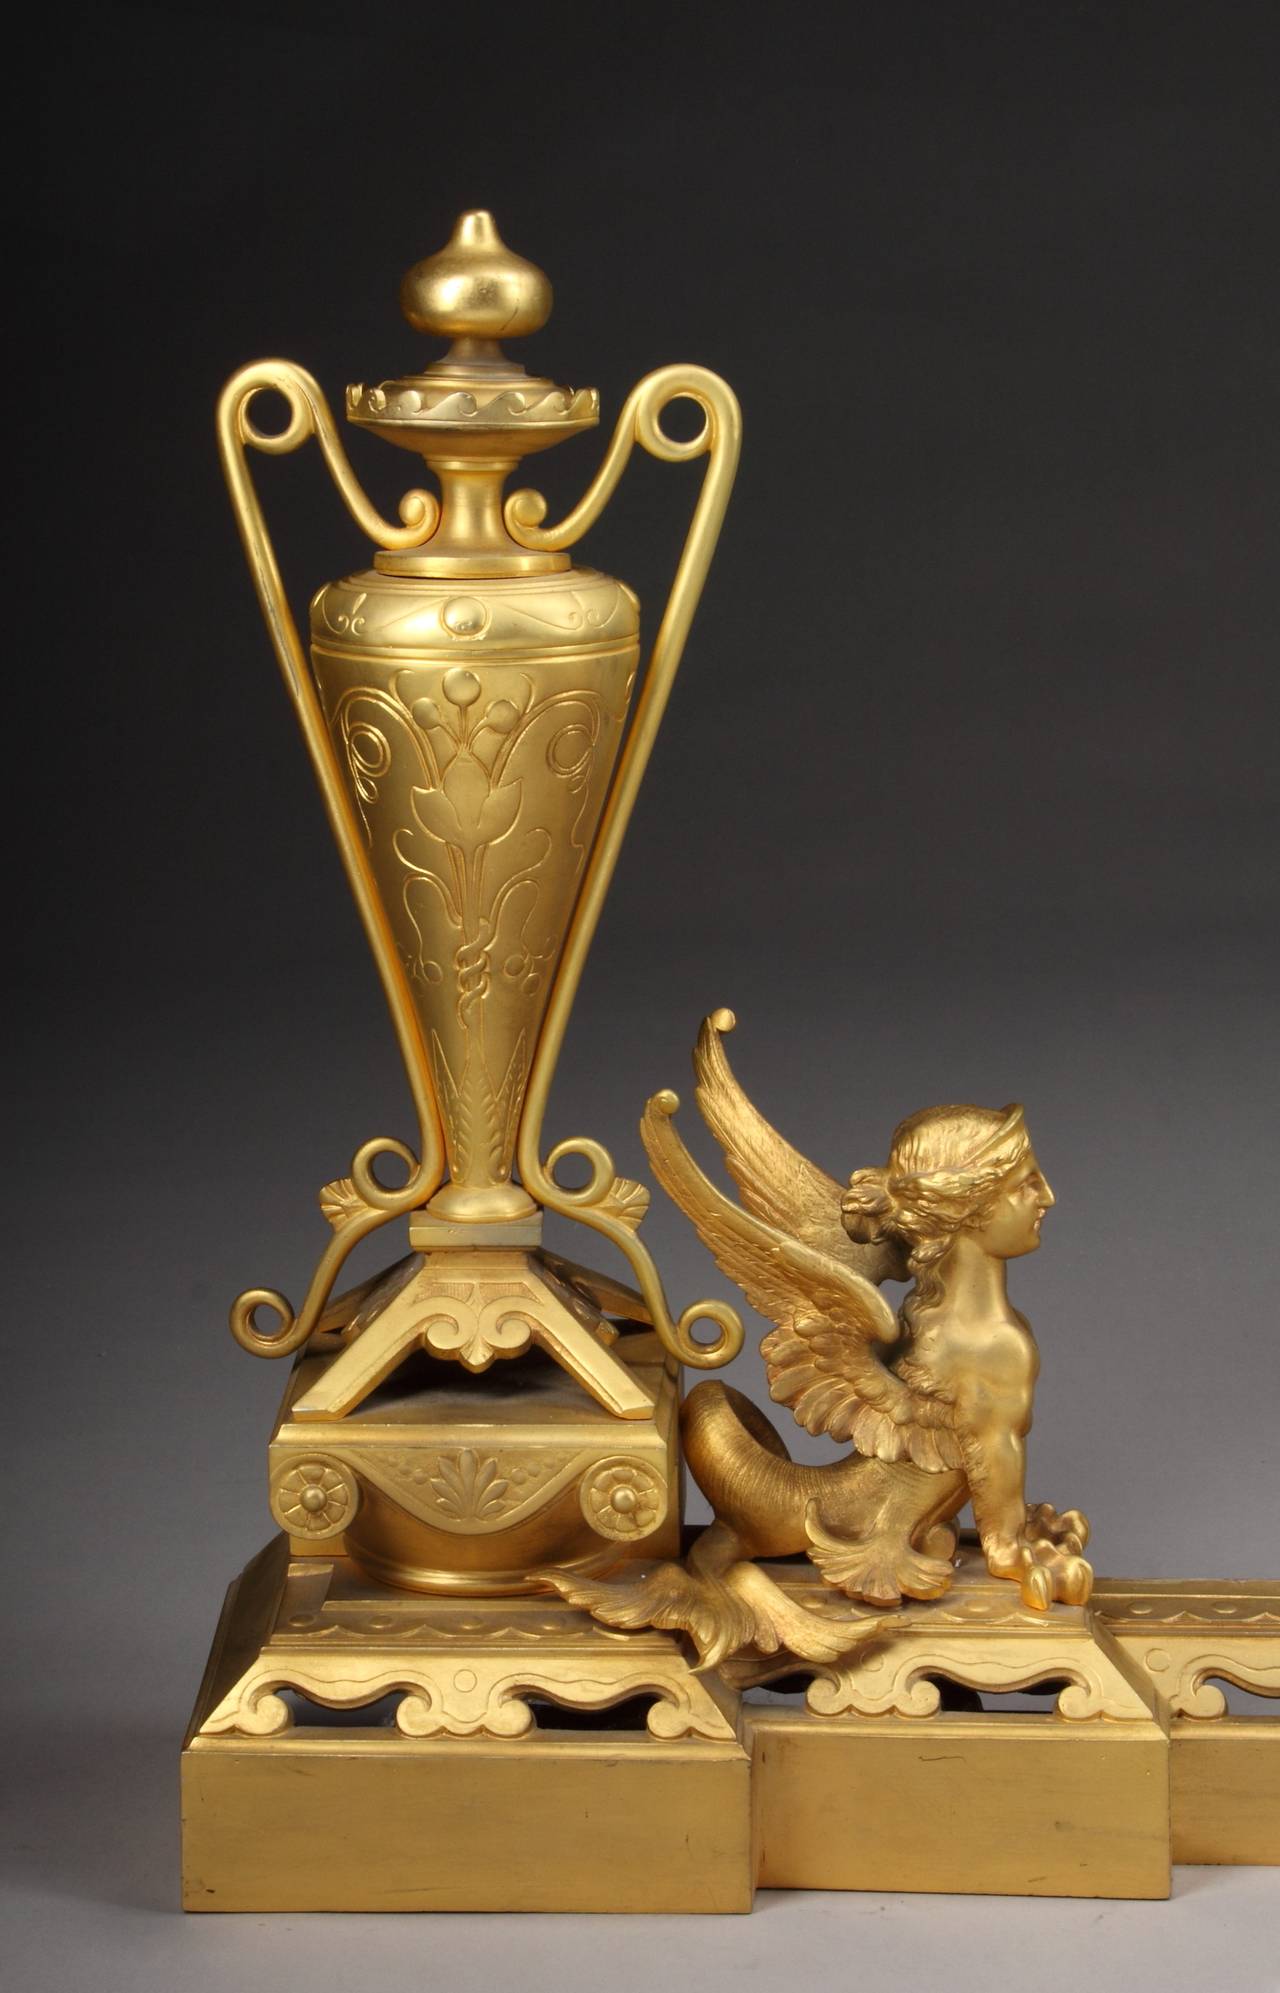 A fine 19th century French gilt bronze figural 3-piece chenets (andirons). Each vase-shaped chenet flanked by a winged melusine figure, joined by a balustrade fender.

Circa 1890

Height: 20